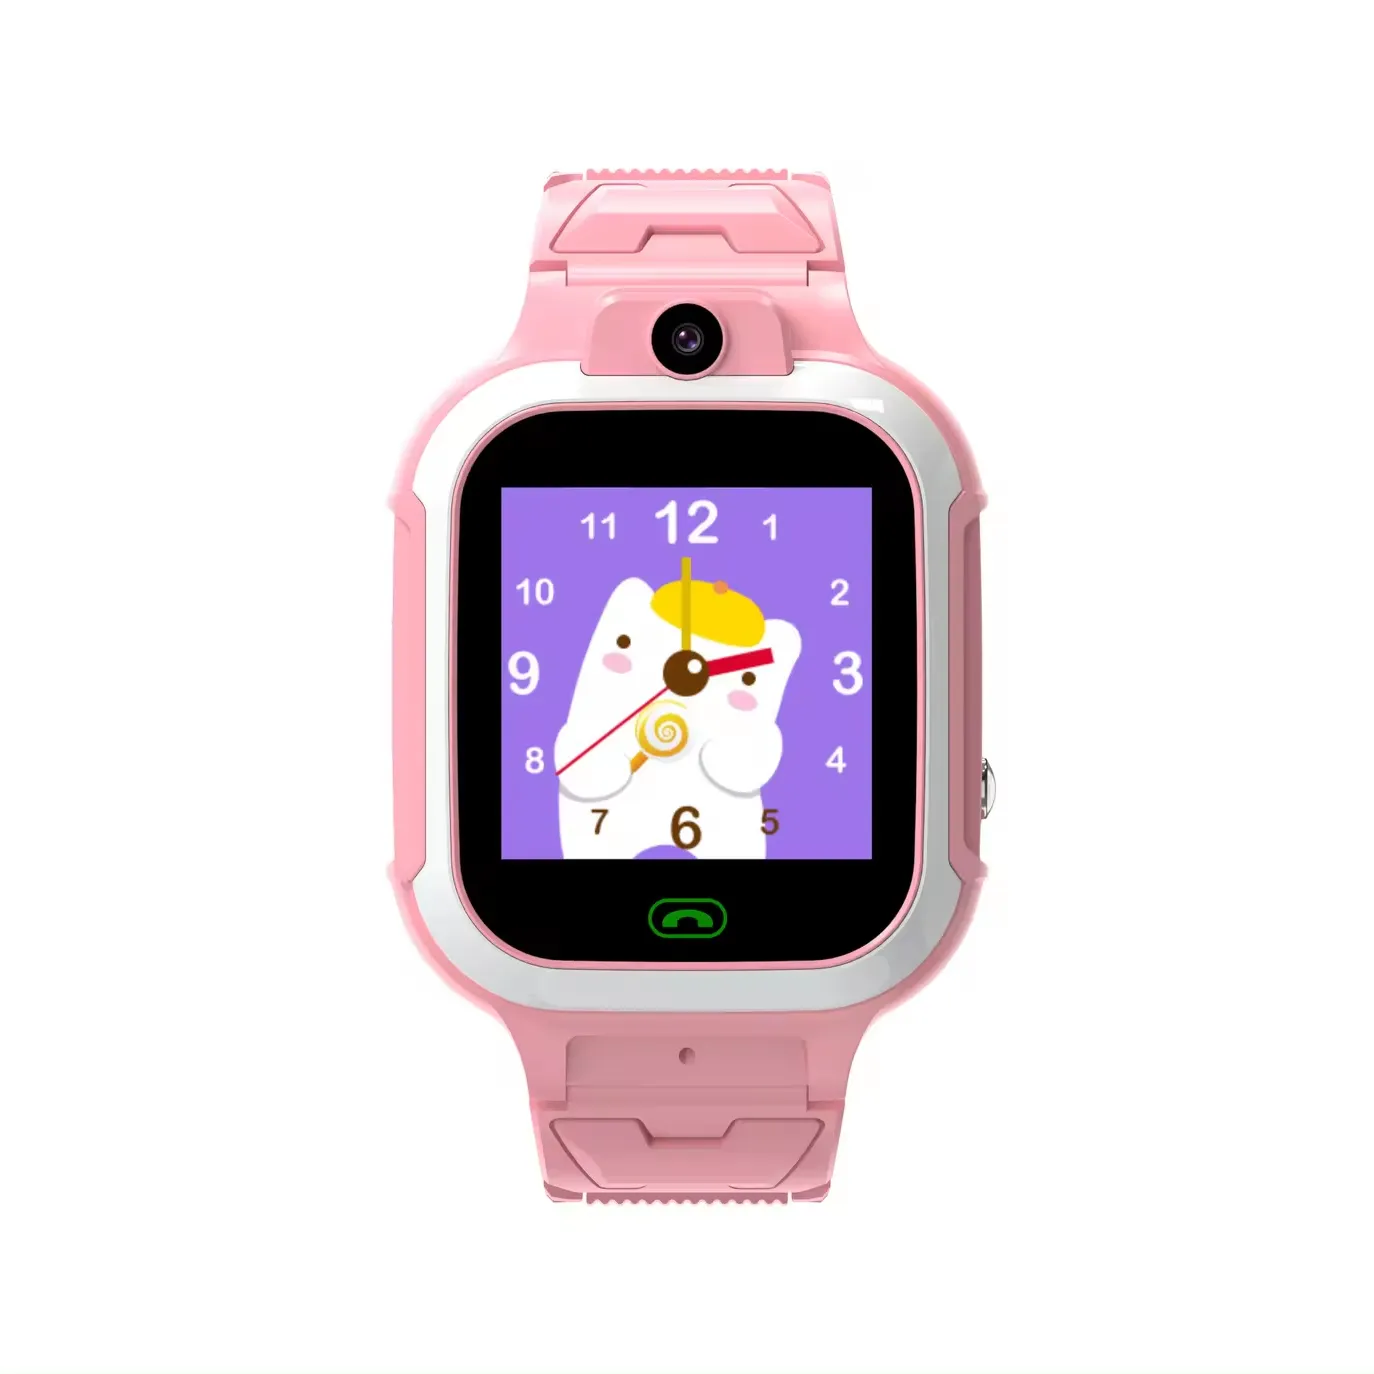 Factory Direct 4G Kids Smart Watch SOS Alarm Camera 240*240 Voice Calling Real Time Tracking IP67 Waterproof Children Watch